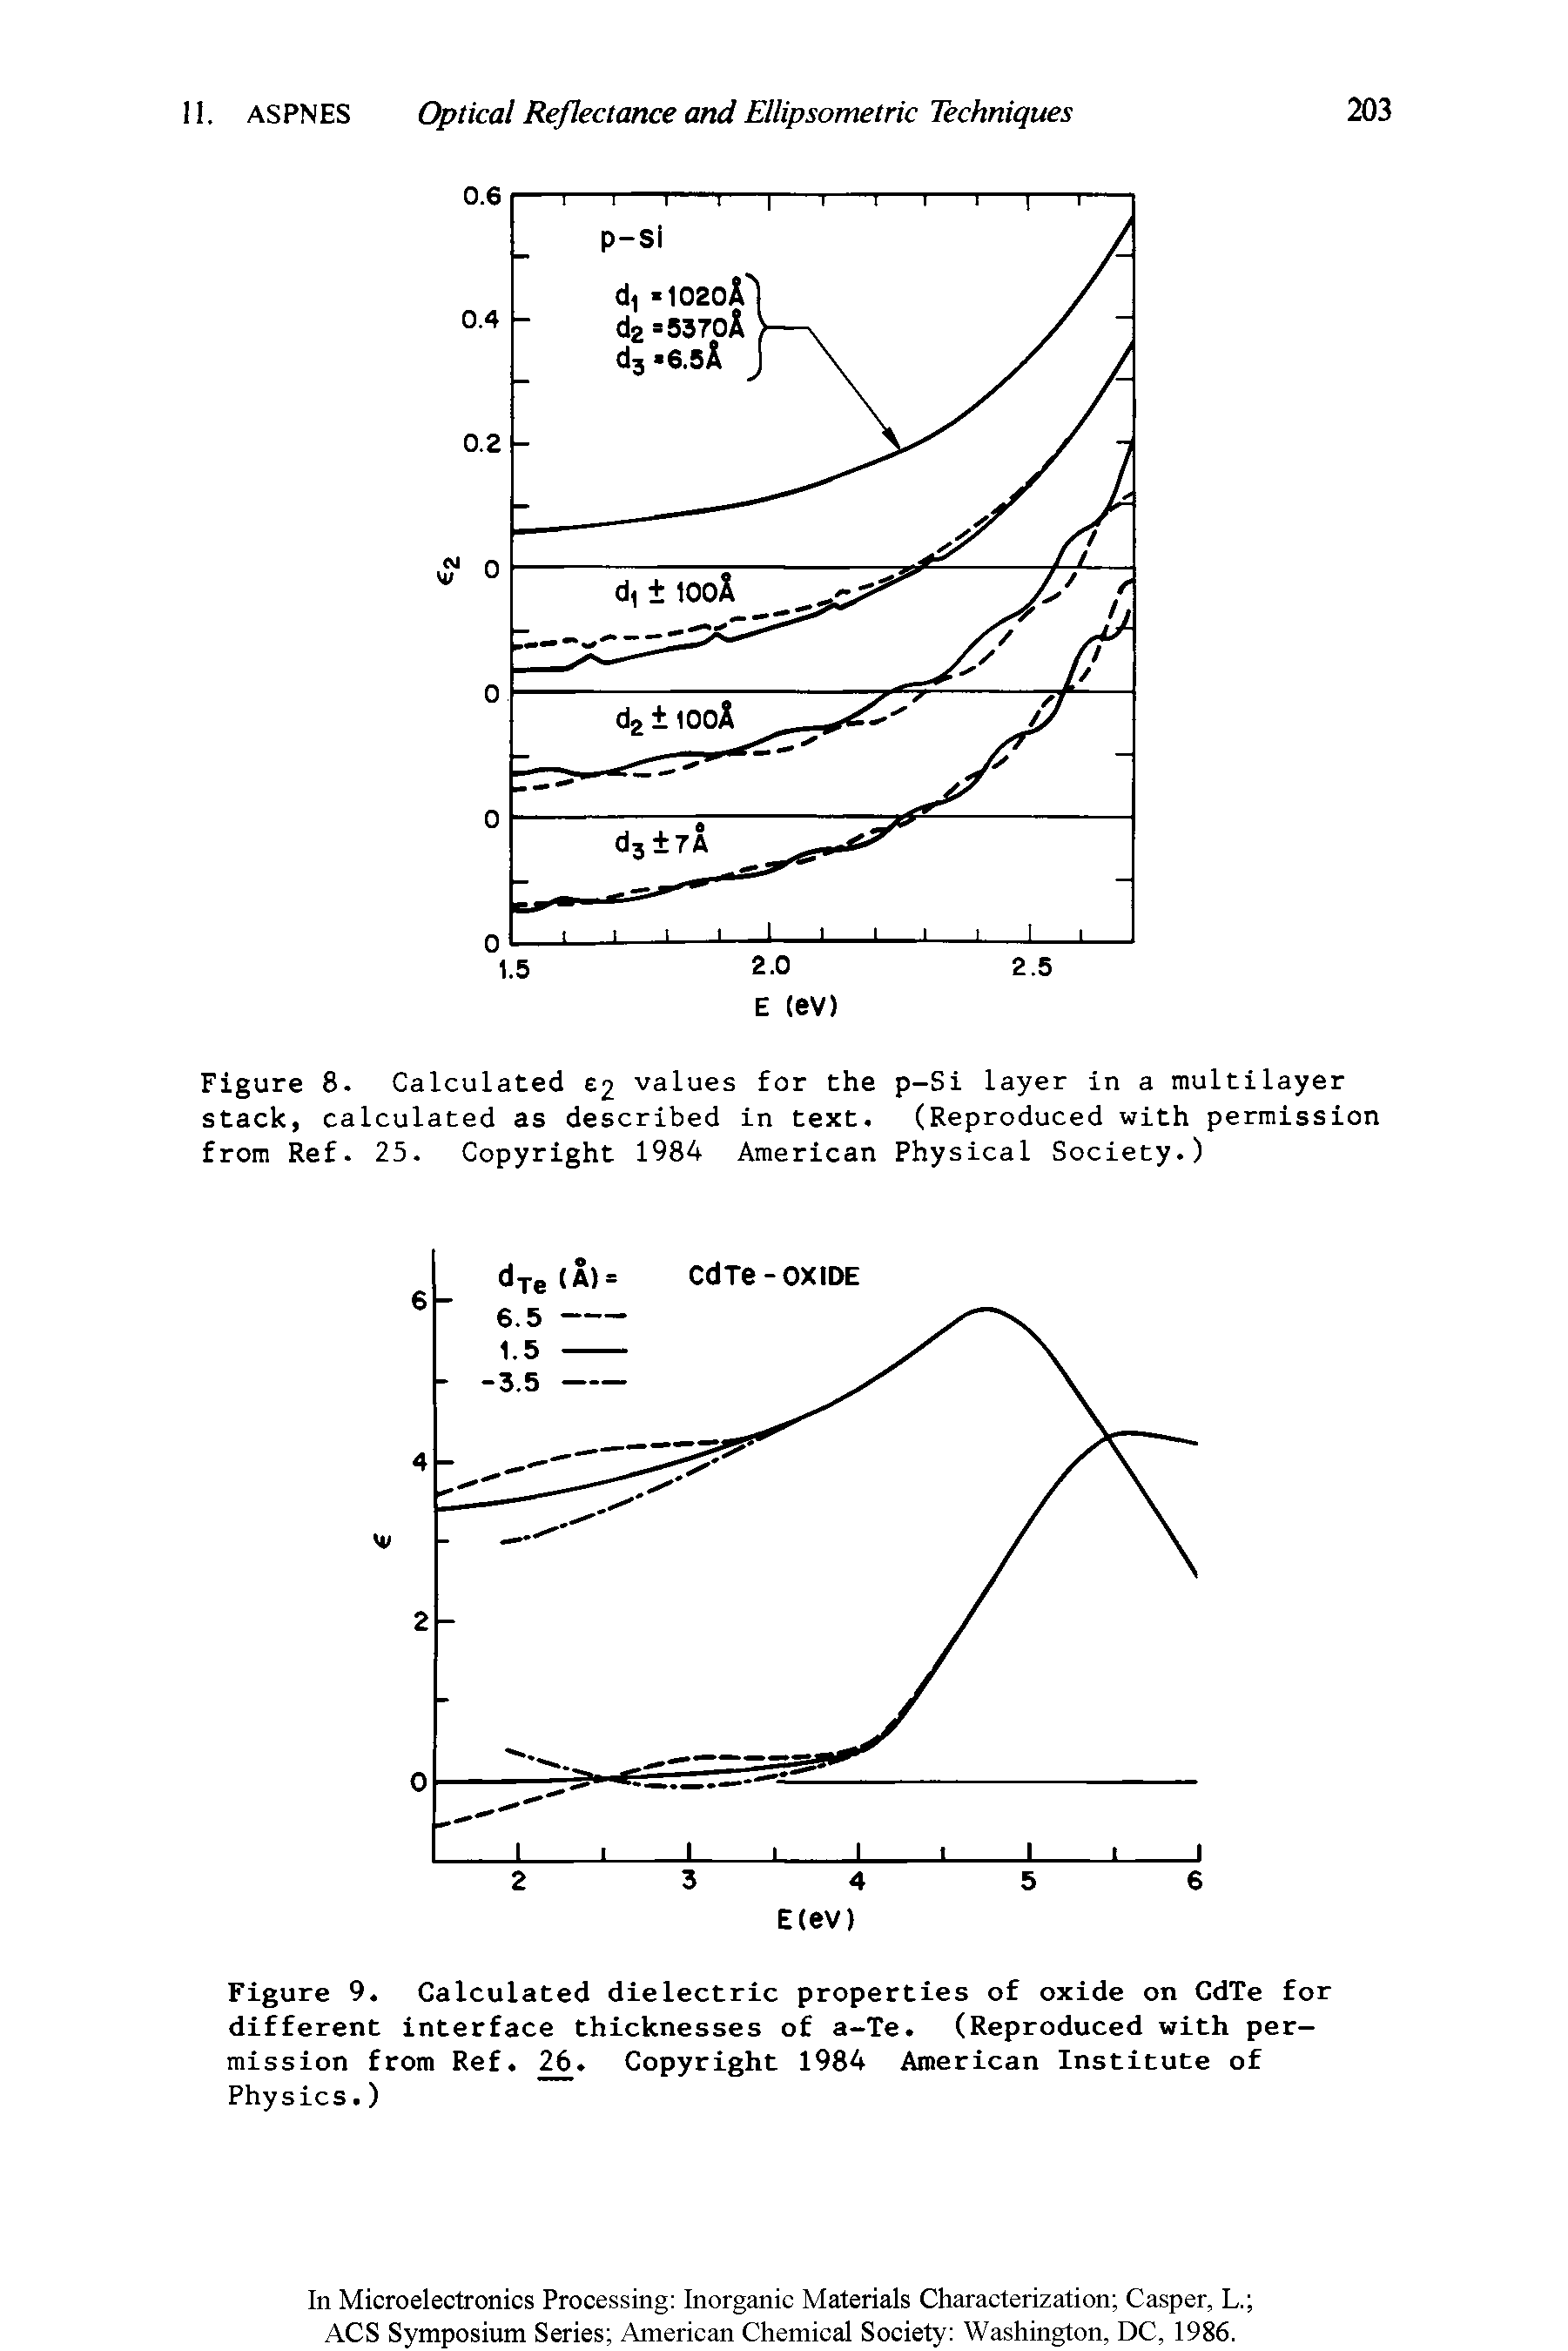 Figure 8. Calculated 2 values for the p-Si layer in a multilayer stack, calculated as described in text. (Reproduced with permission from Ref. 25. Copyright 1984 American Physical Society.)...